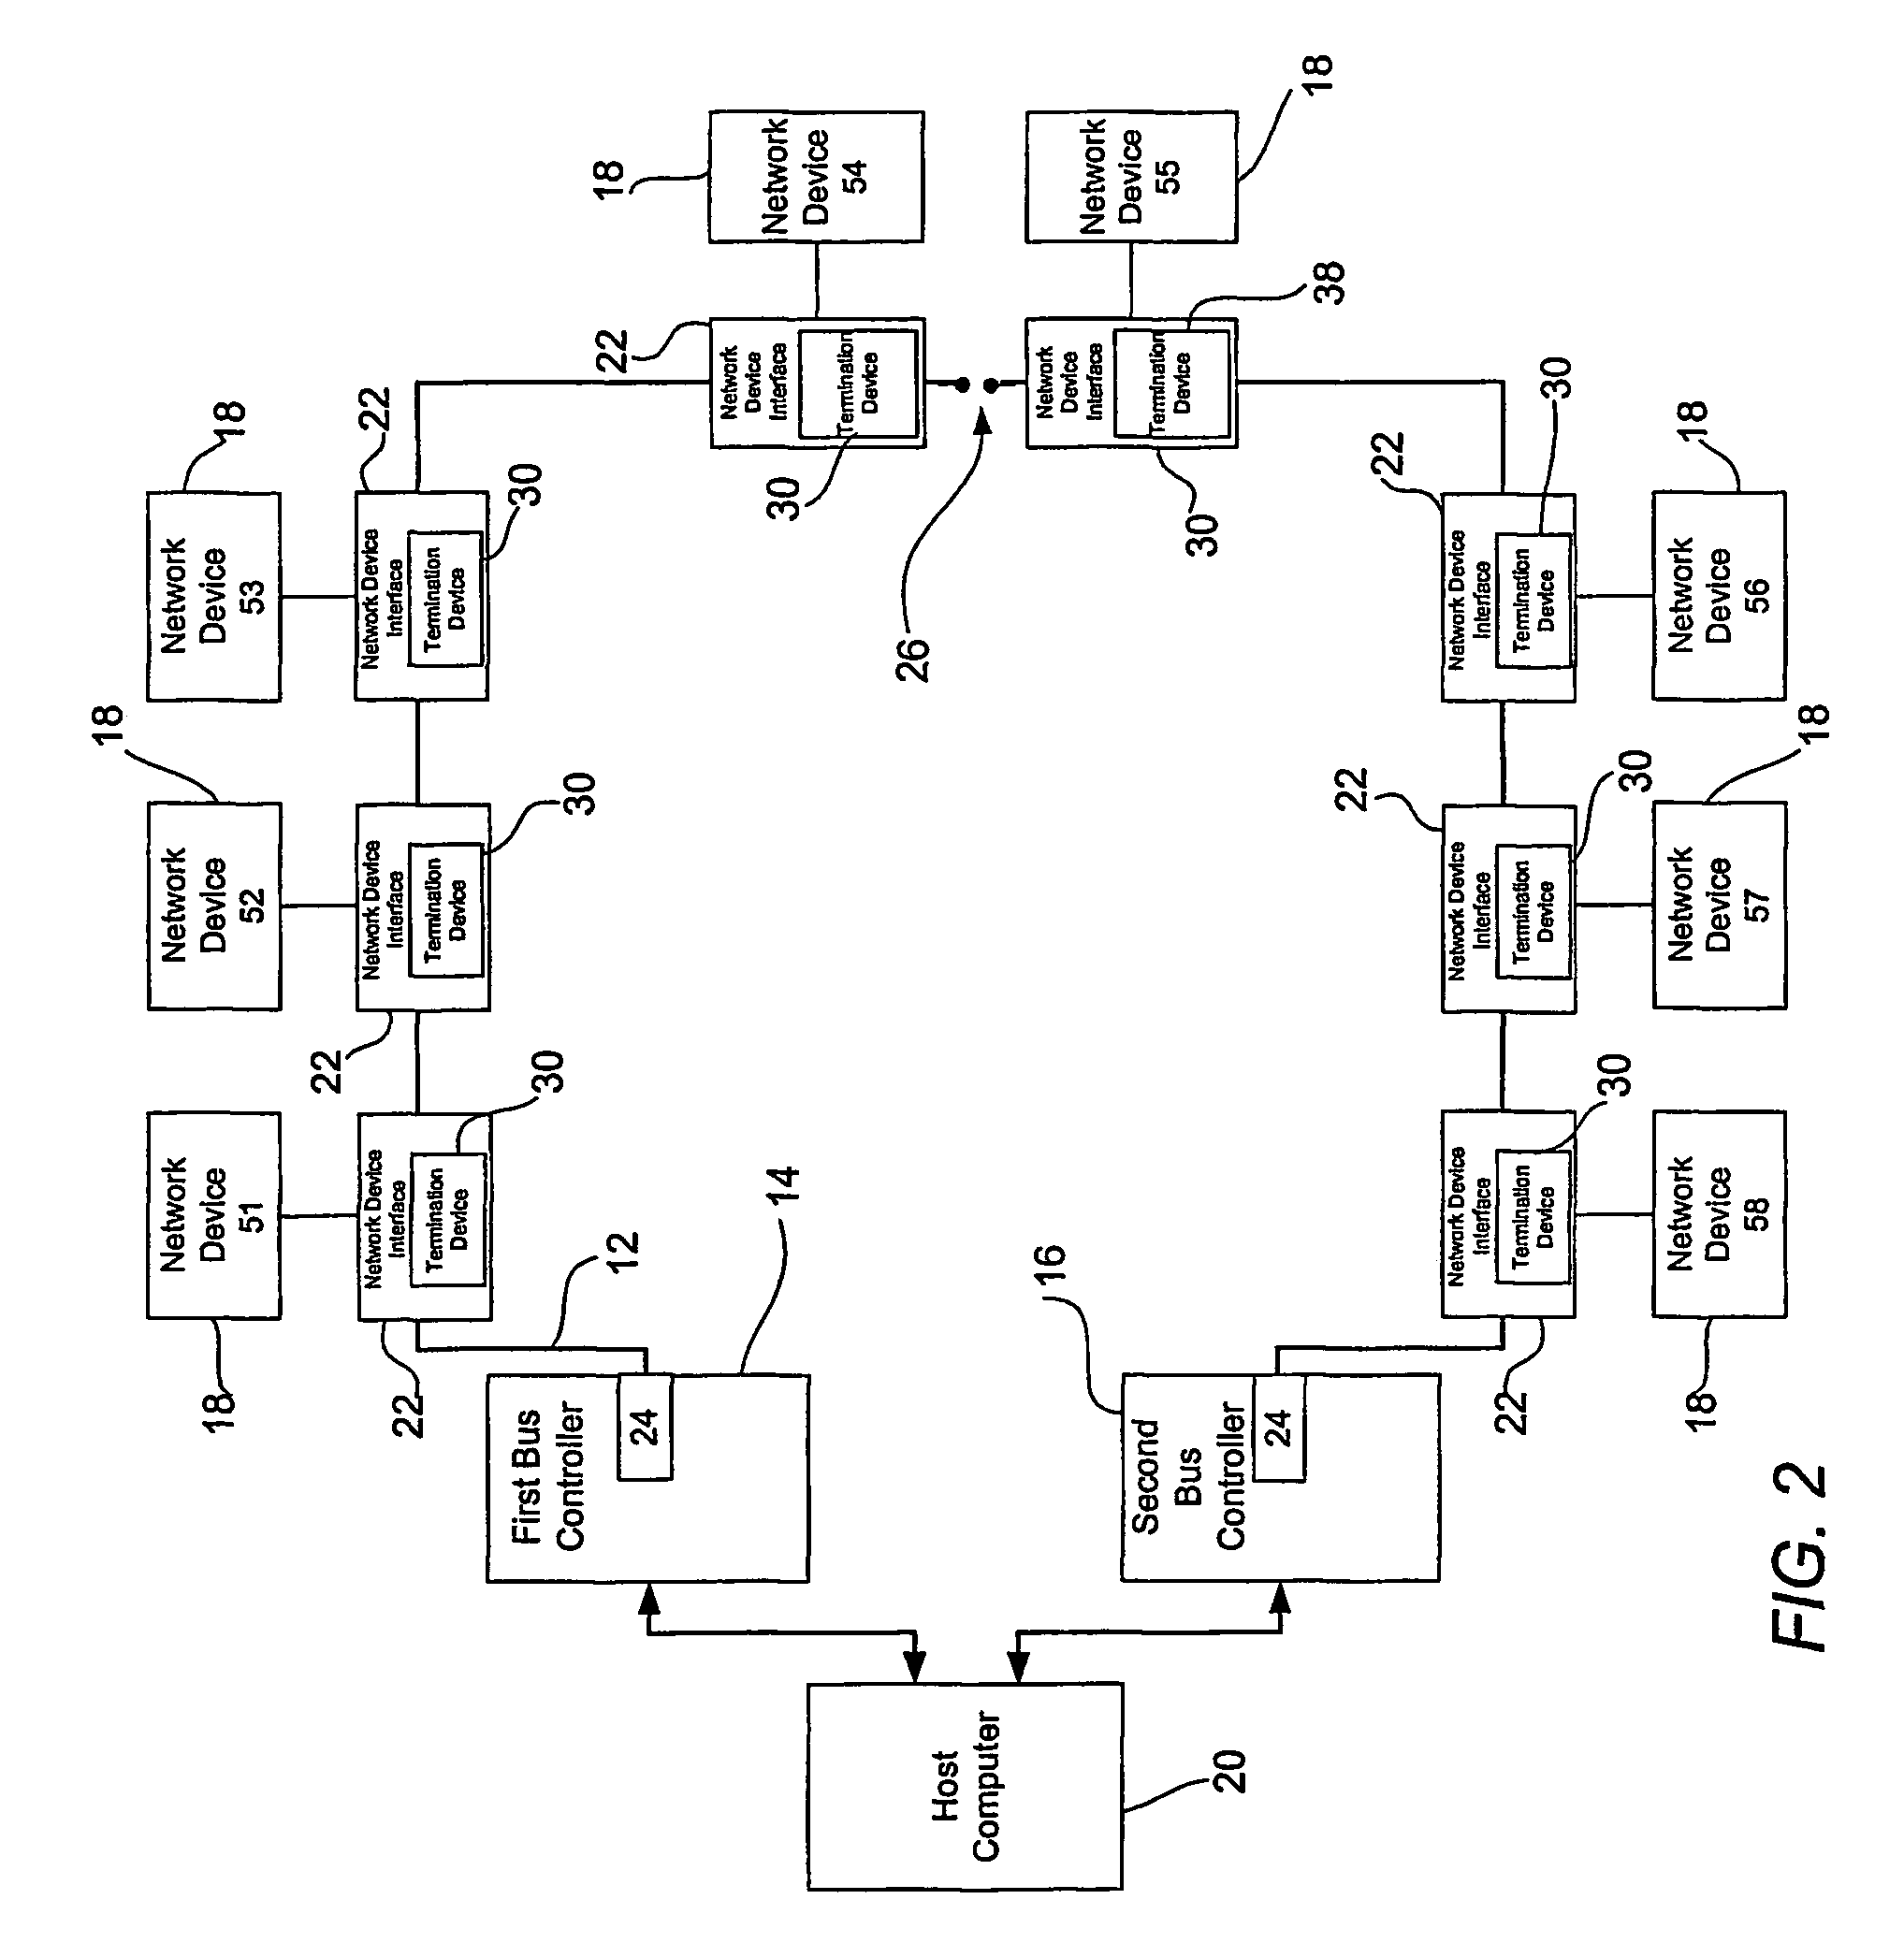 Systems and methods for maintaining network stability